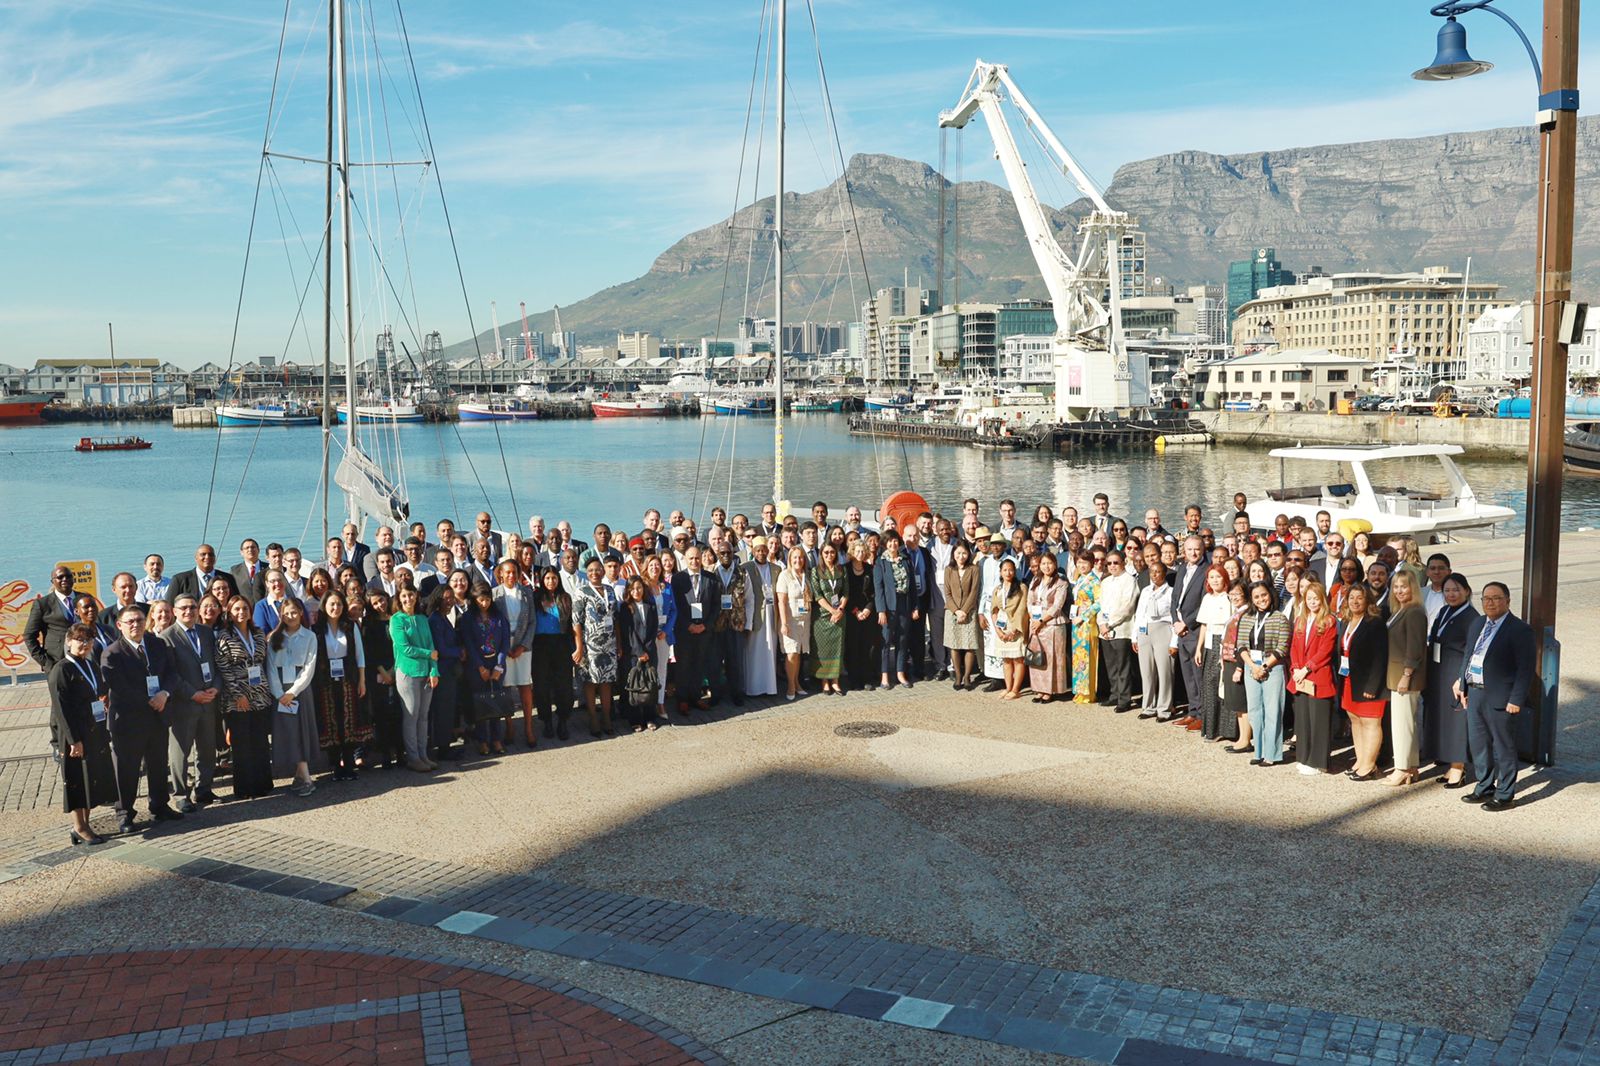 Developing environmental fundraising solutions. BIOFIN Regional Dialogue delegates from all over the globe gather at the grounds of the Table Bay Hotel in Cape Town held in South Africa. 